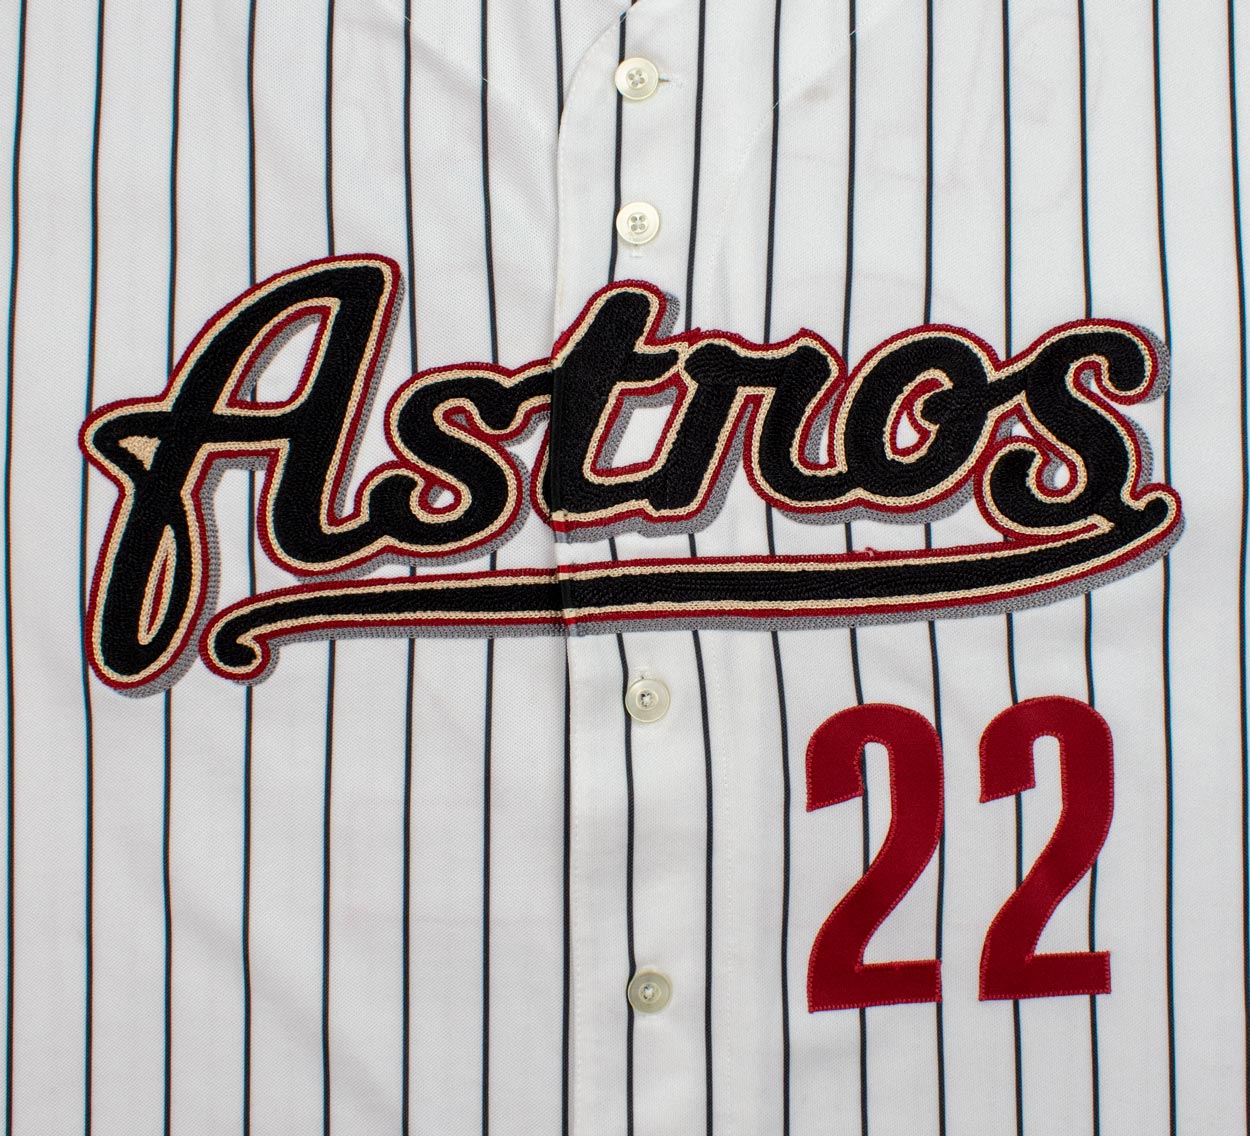 Roger Clemens Autographed Houston Astros Brick Jersey with 2005